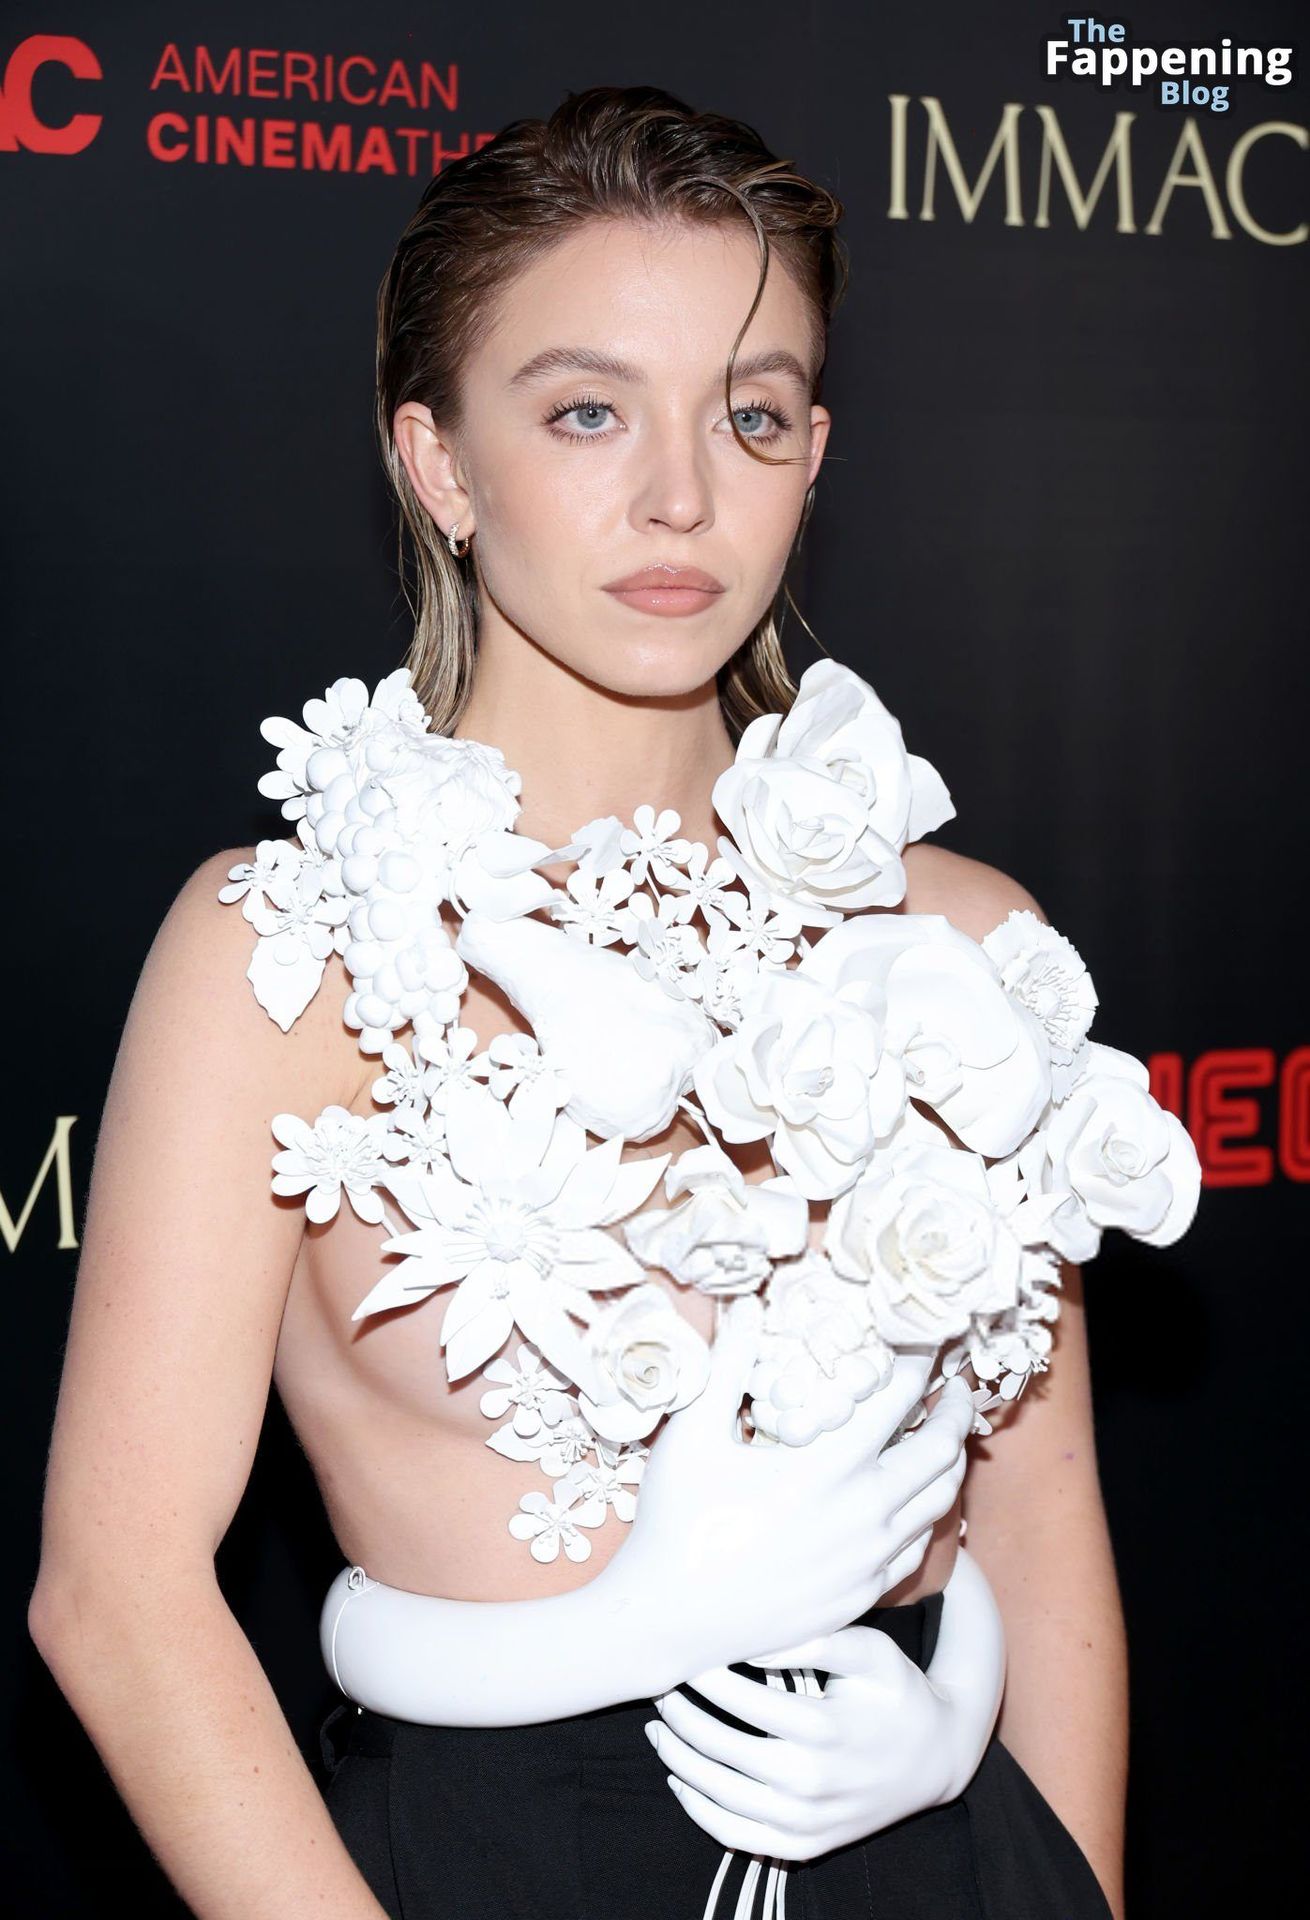 Sydney-Sweeney-Immaculate-Premiere-Glamorous-Outfit-Breasts-6-thefappeningblog.com_.jpg